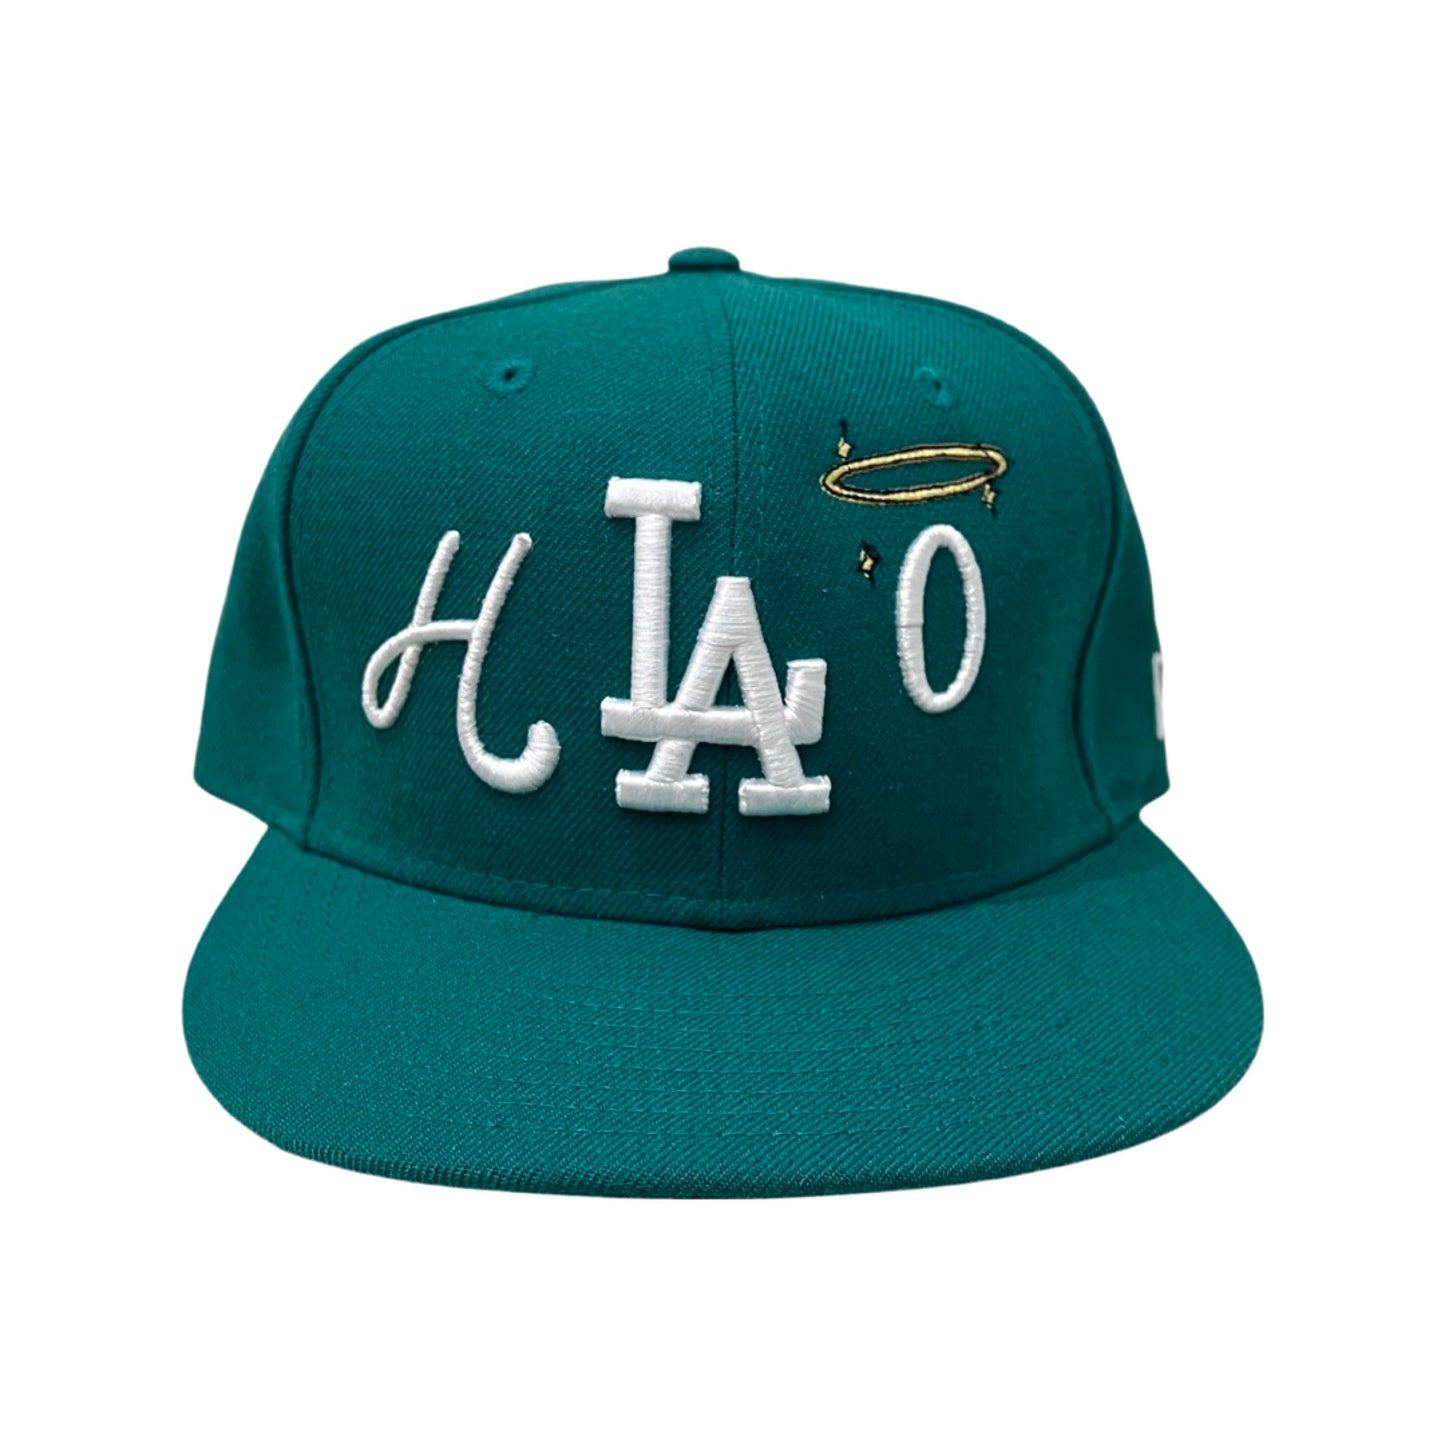 1/12 HALO FITTED HAT SIZE 7 1/8